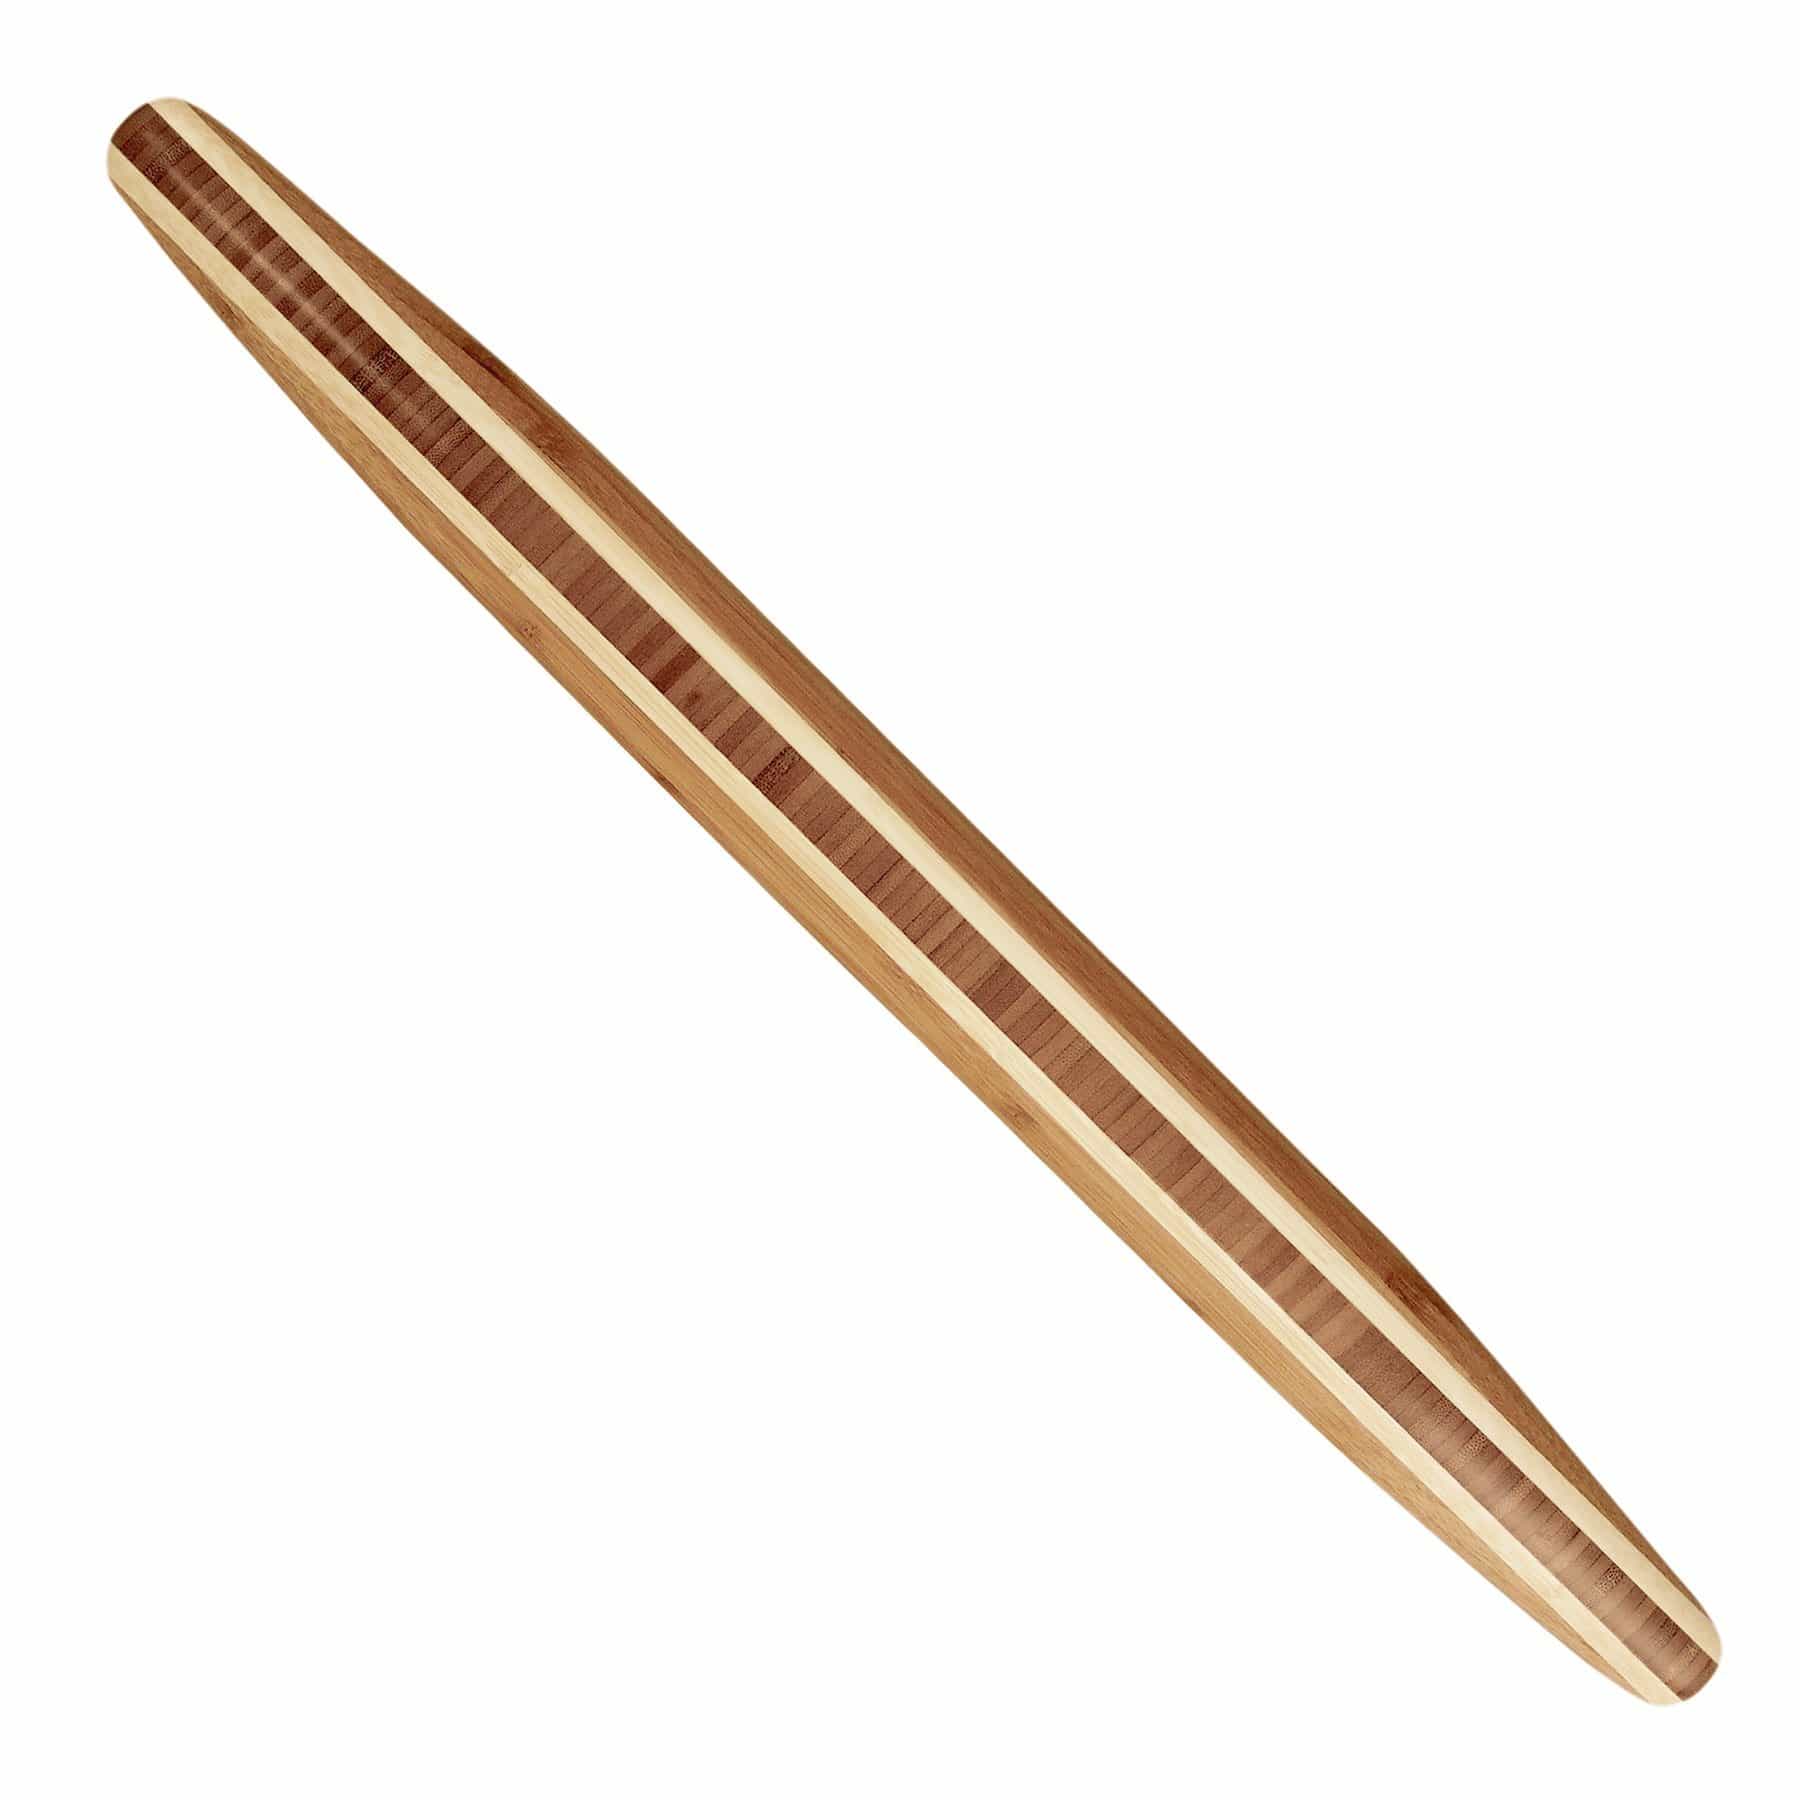 Totally Bamboo Tapered Rolling Pin, 20-1/2" x 1-3/4"